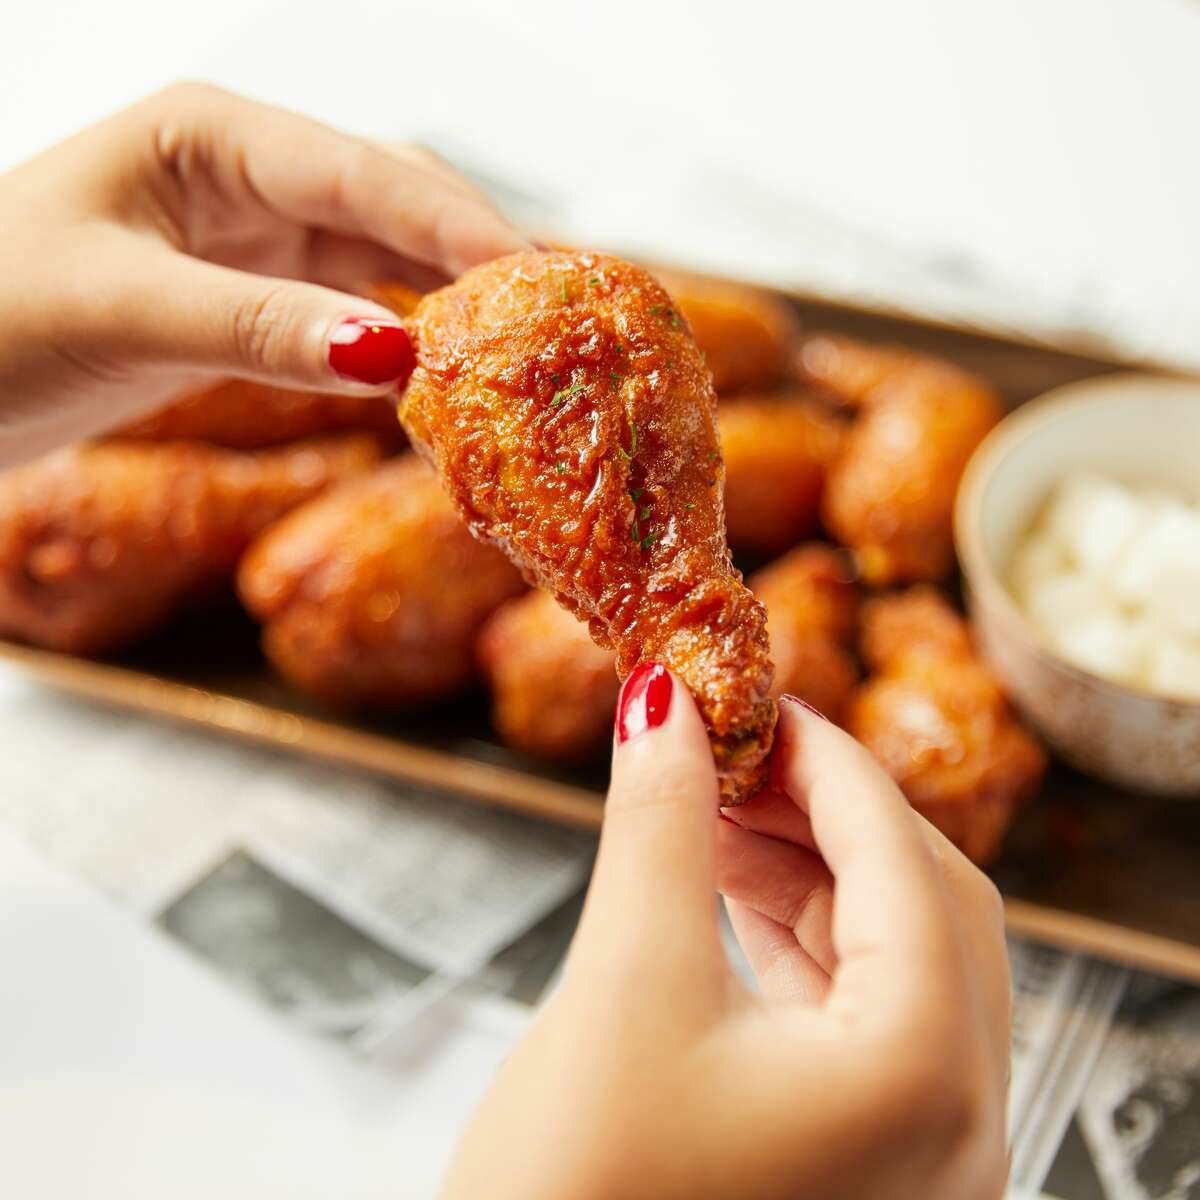 Korean fried chicken brand Bonchon has announced it will open in Midtown at 2100 Travel in 2020.